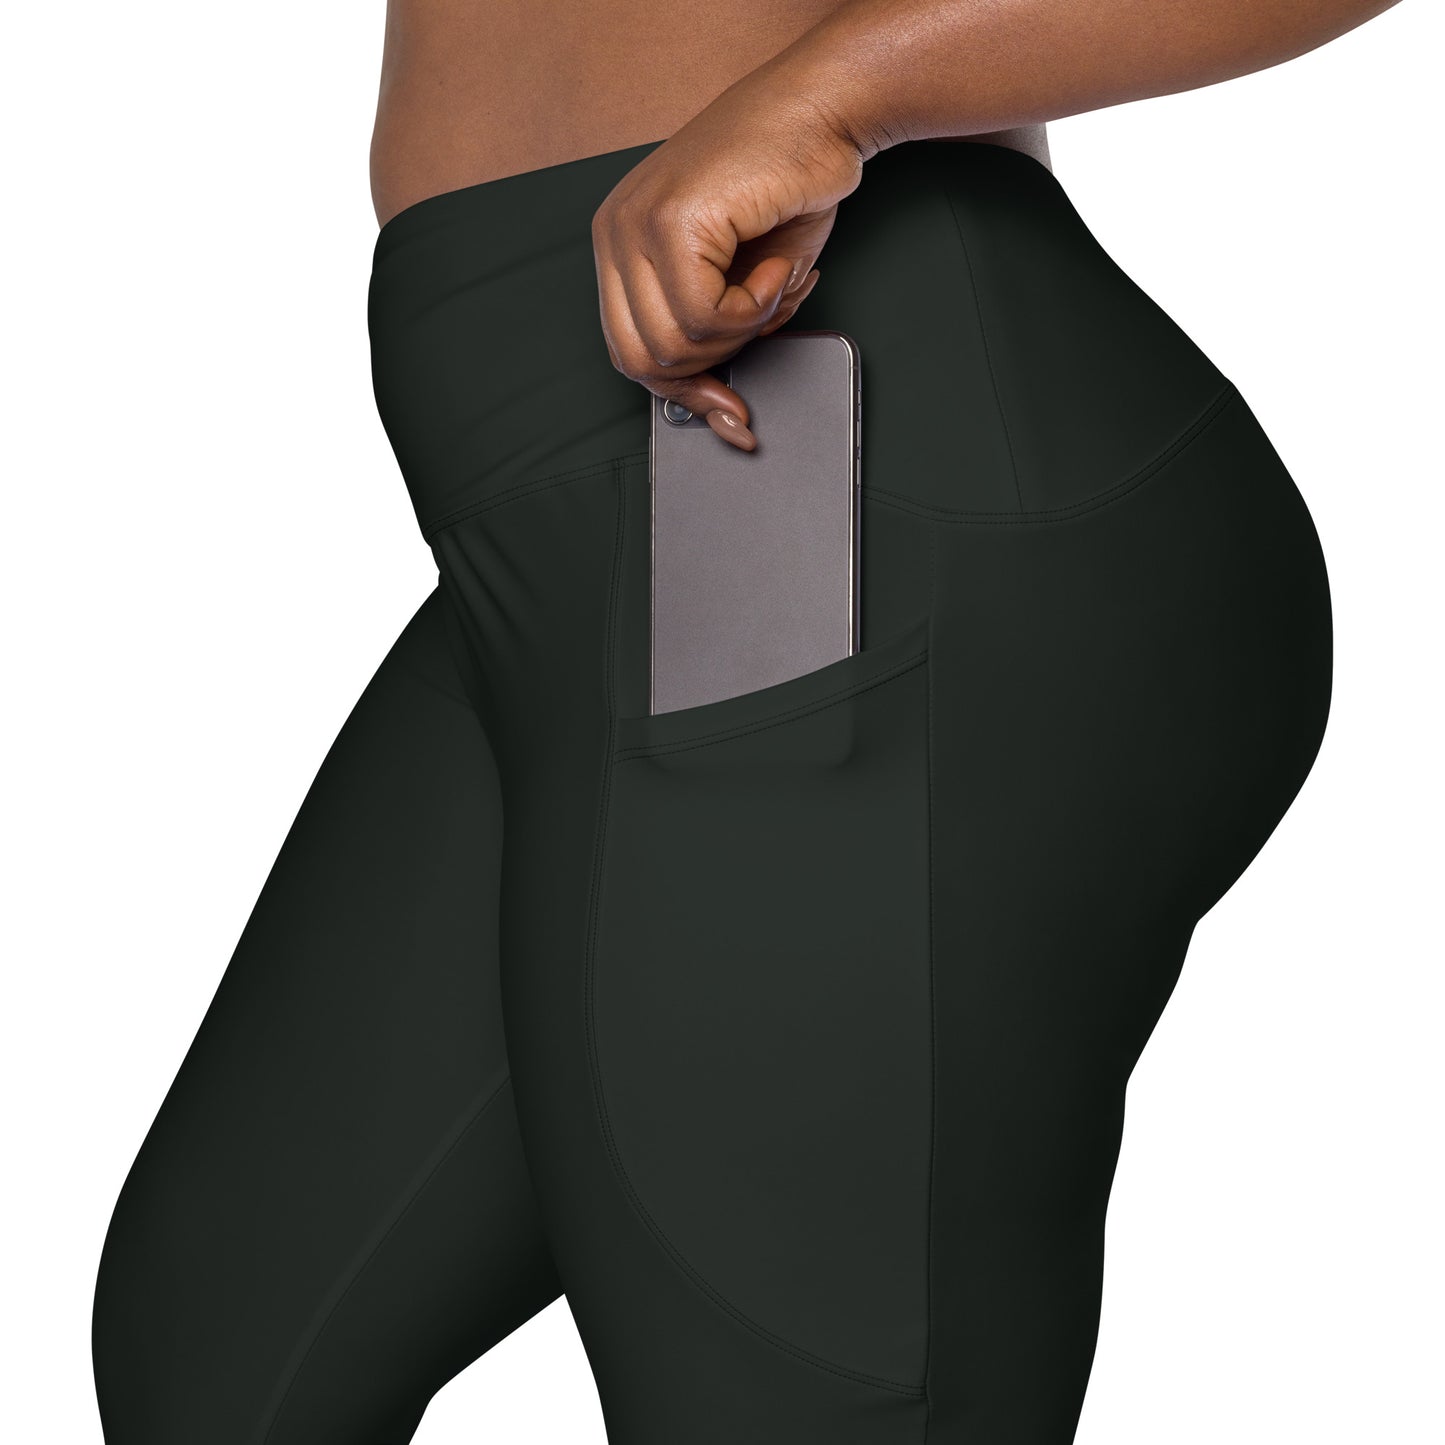 Crossover leggings with Side-pockets-Olive